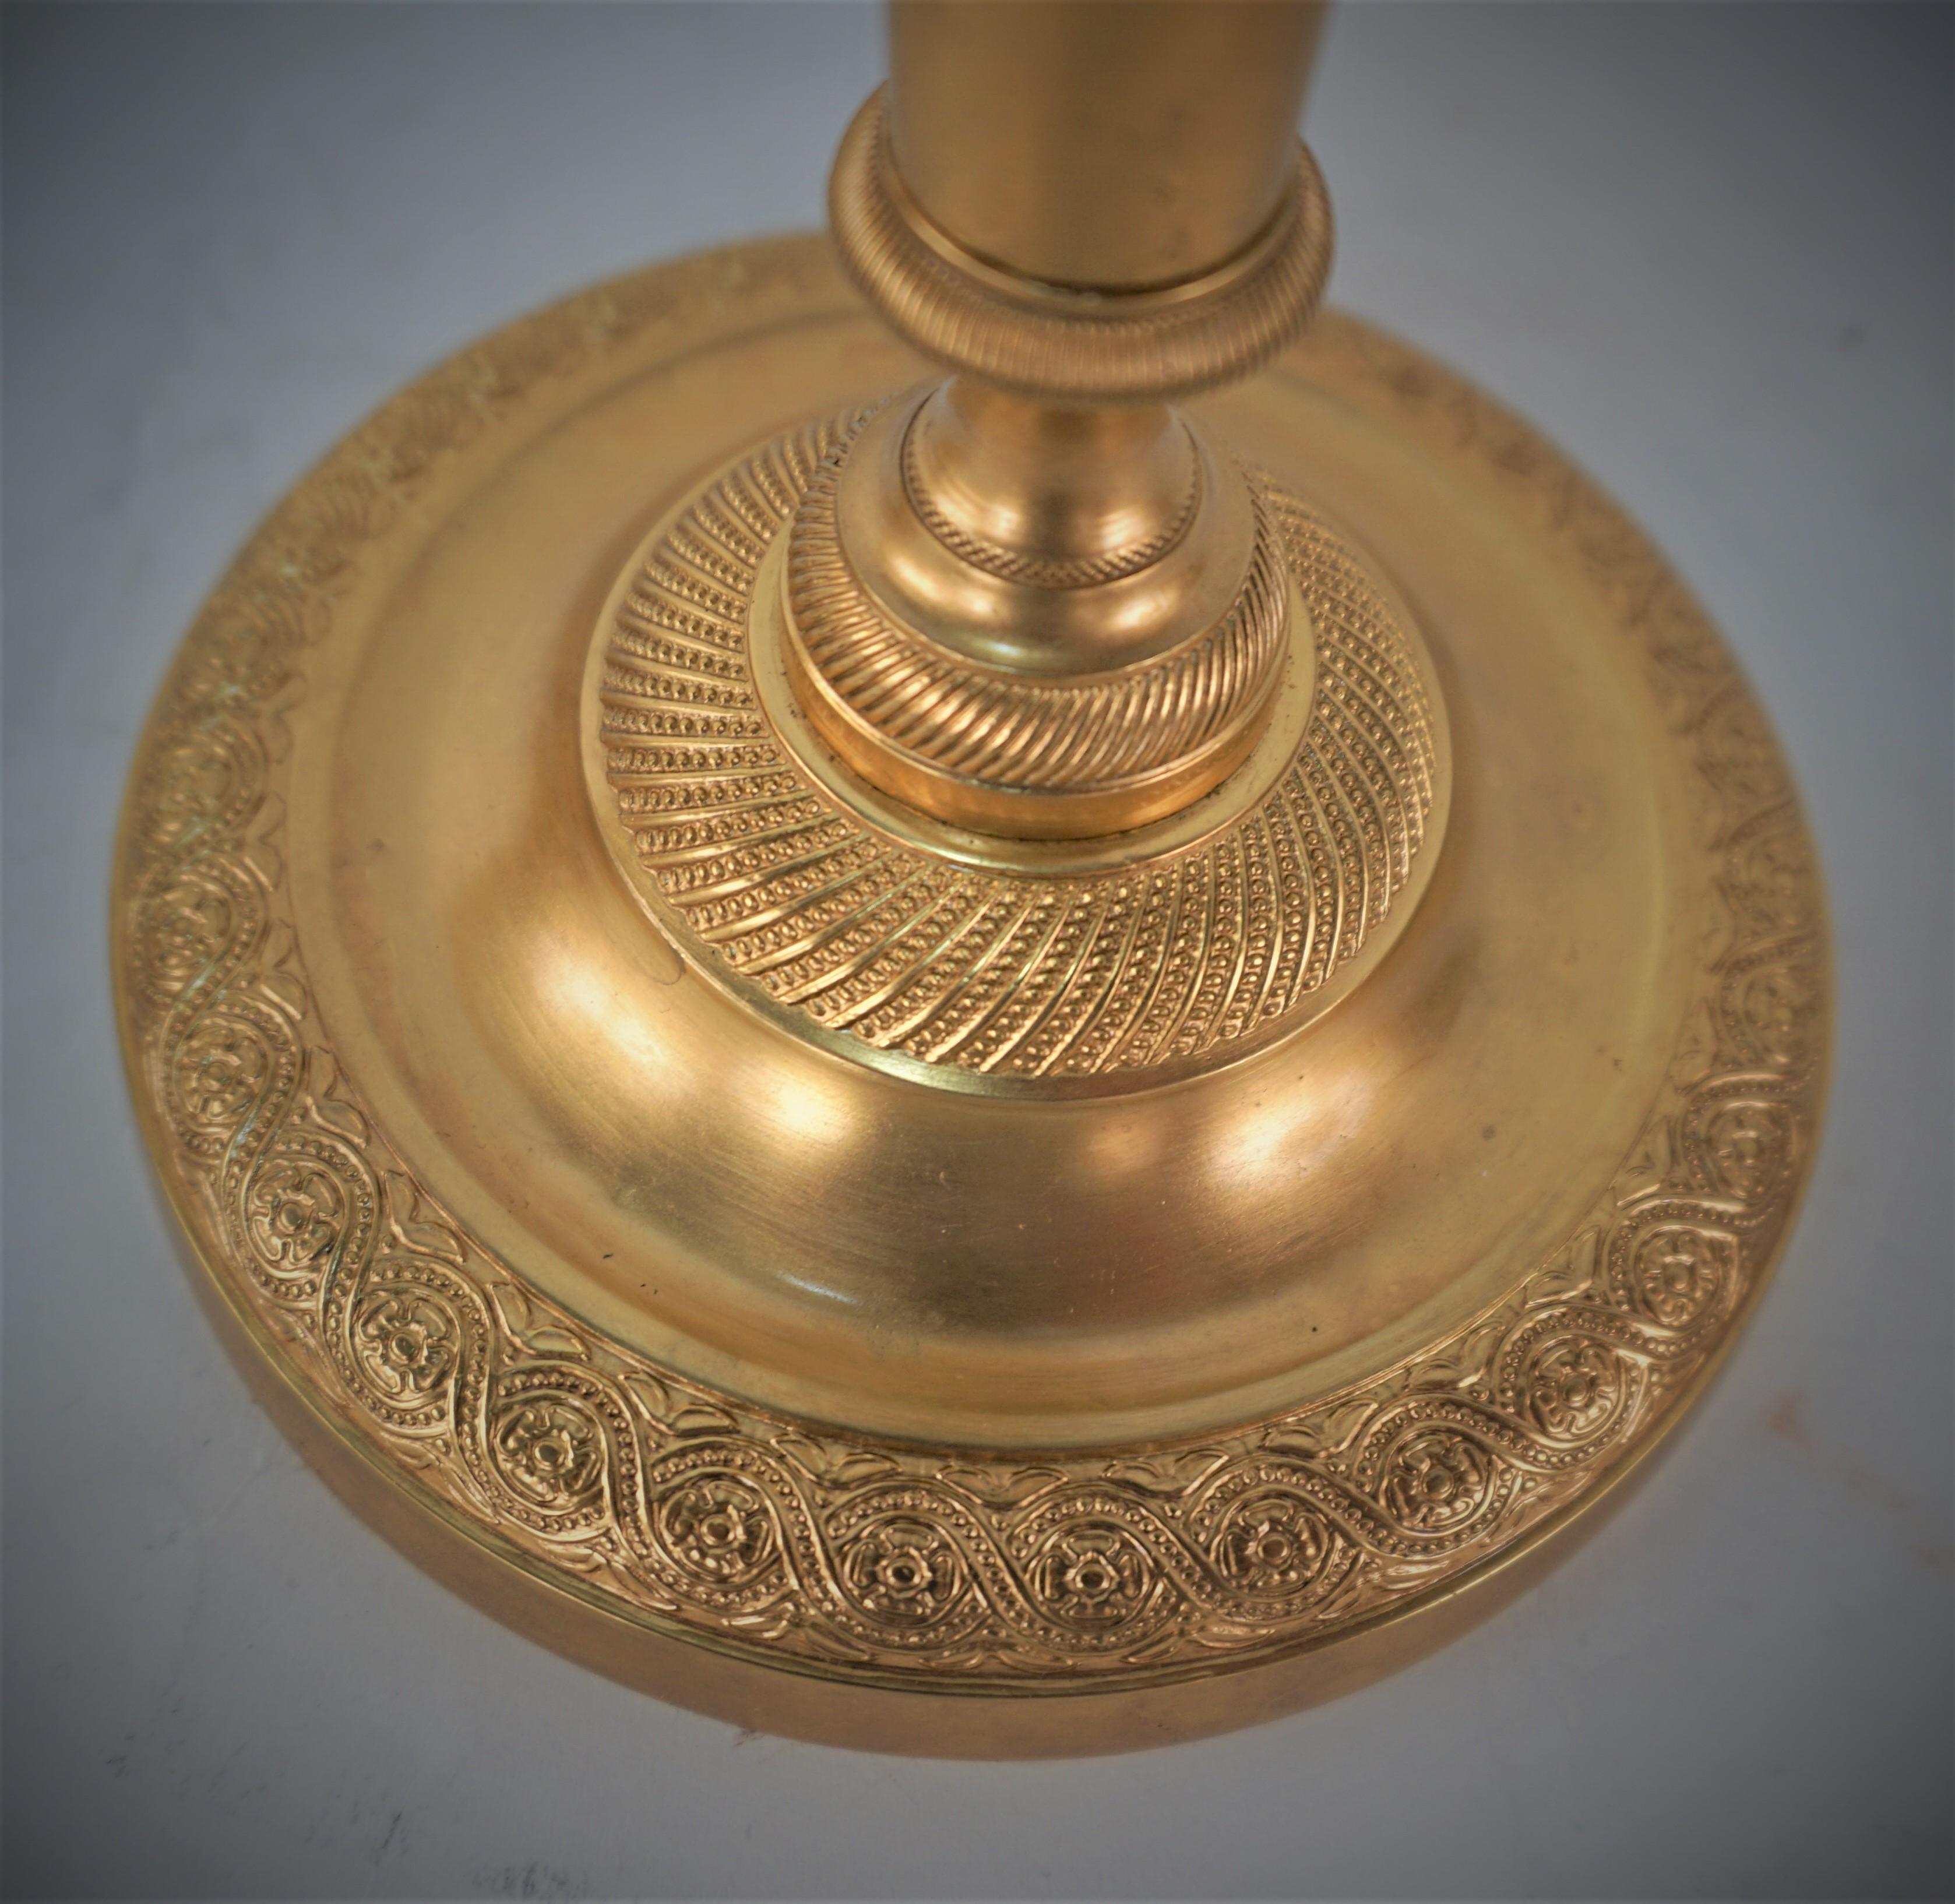 Pair of 19th century empire style gilt bronze candleholders with exceptionary great detail casting.